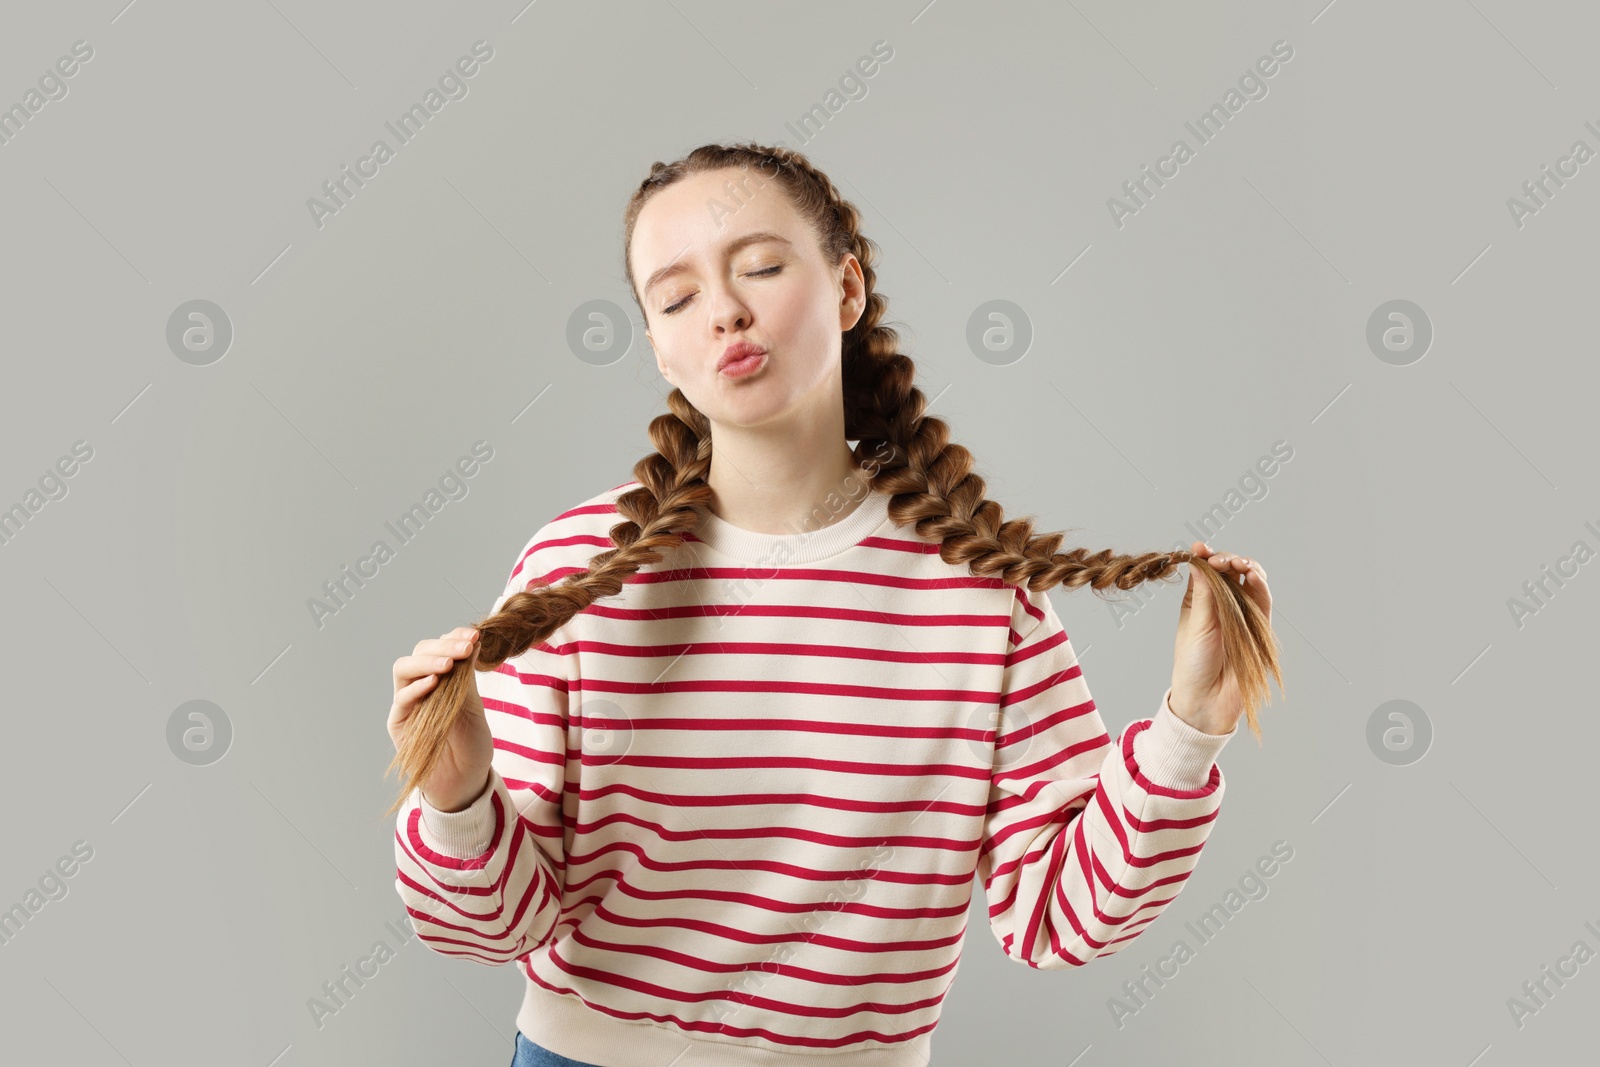 Photo of Woman with braided hair sending air kiss on grey background